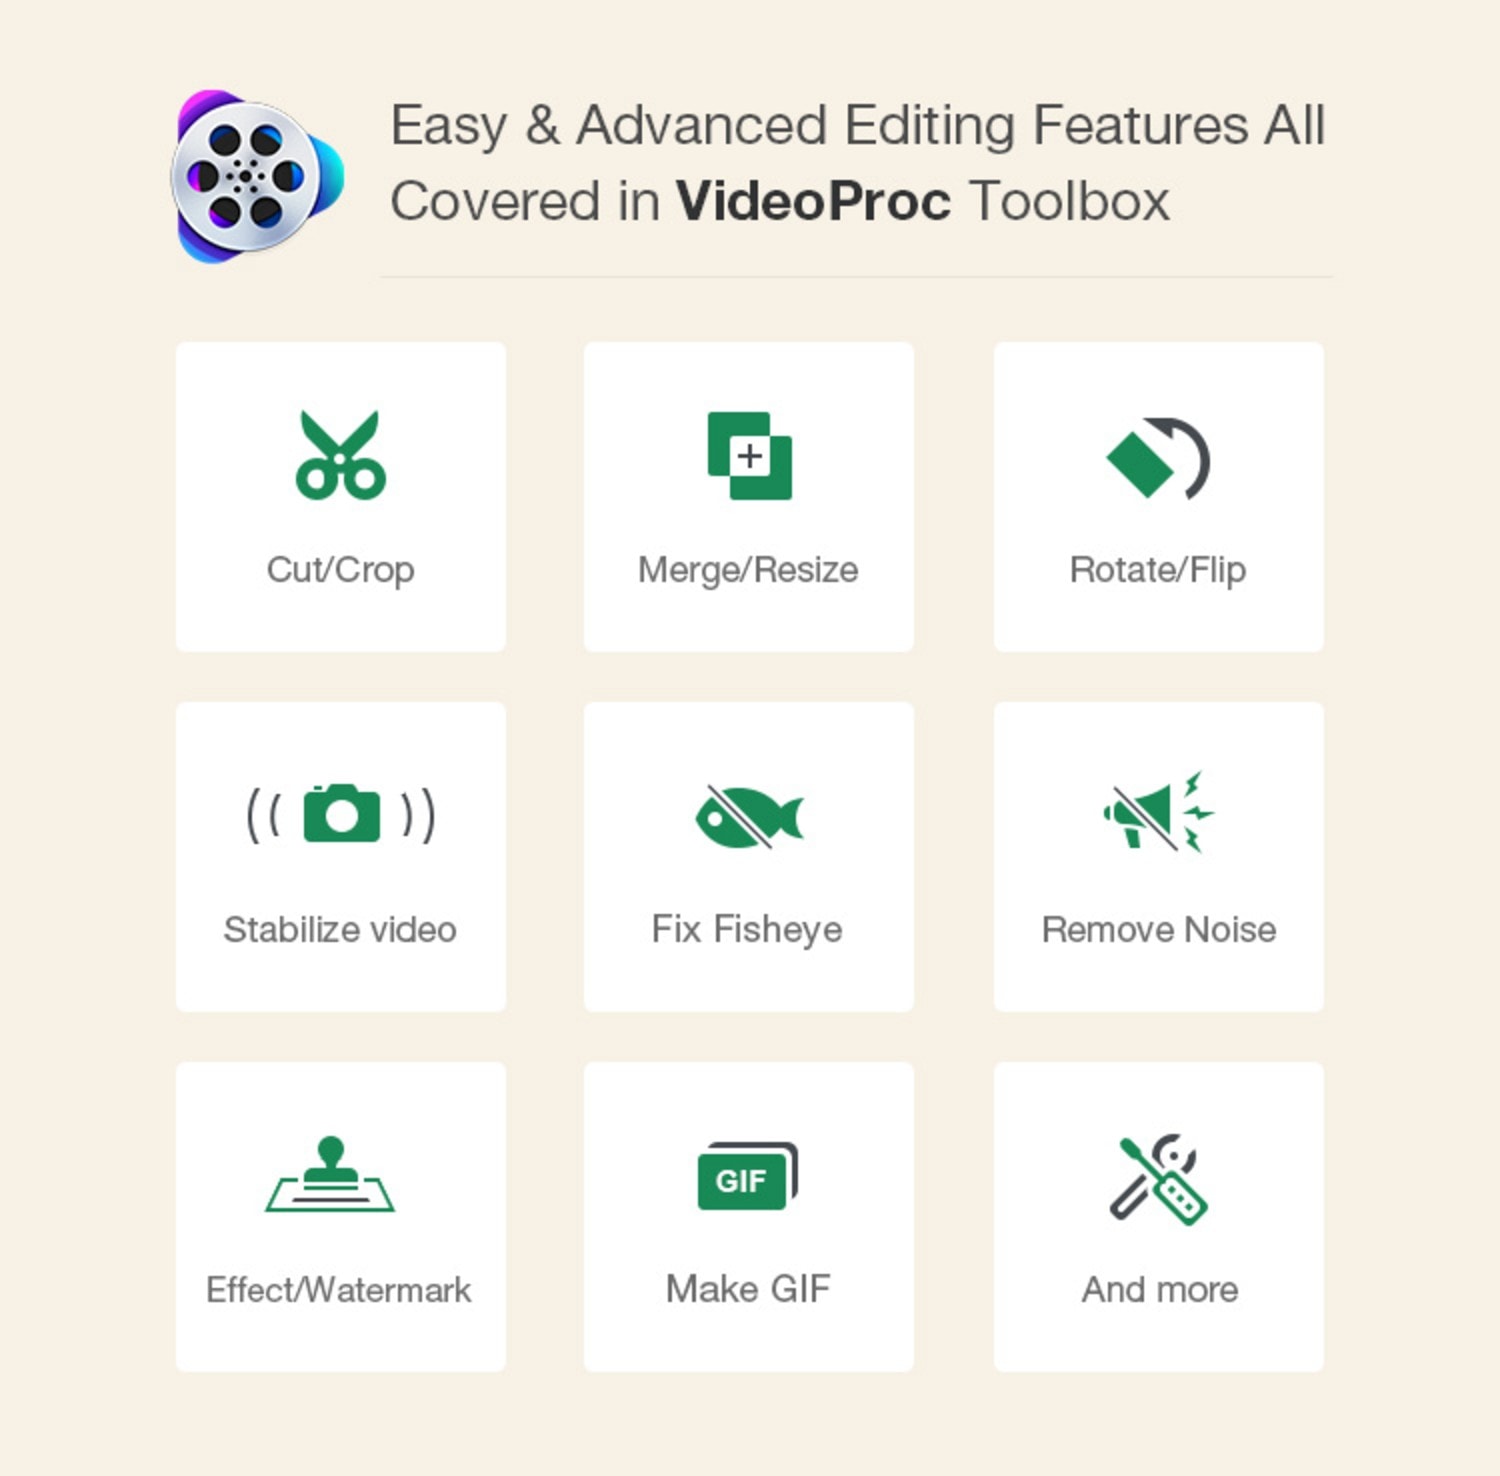 VideoProc can handle all your video editing and processing tasks, without a huge learning curve.